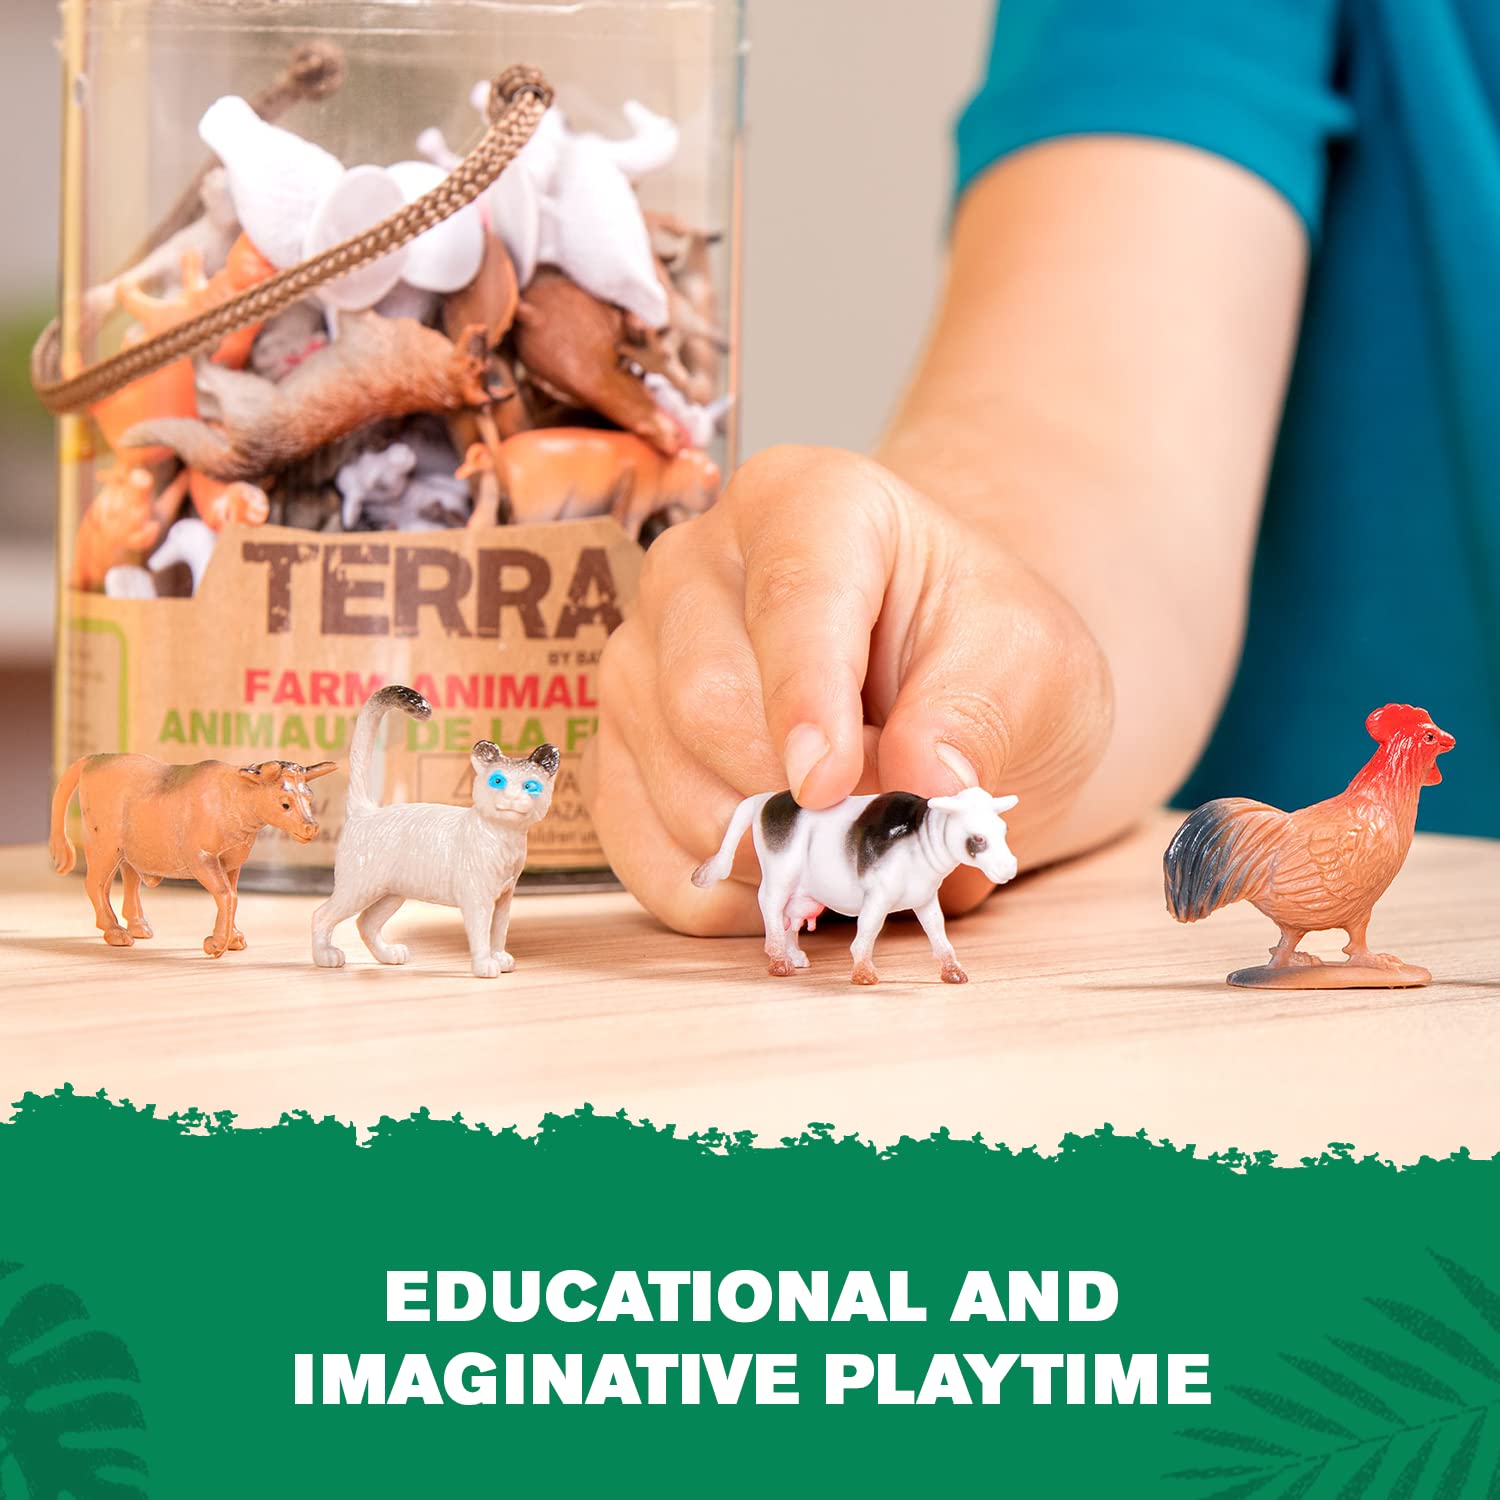 Terra by Battat Assorted Farm Animals Toys – Educational Toys for 3+ Year Old Kids - Collectible Farm Animal Figurines (60 Pieces)